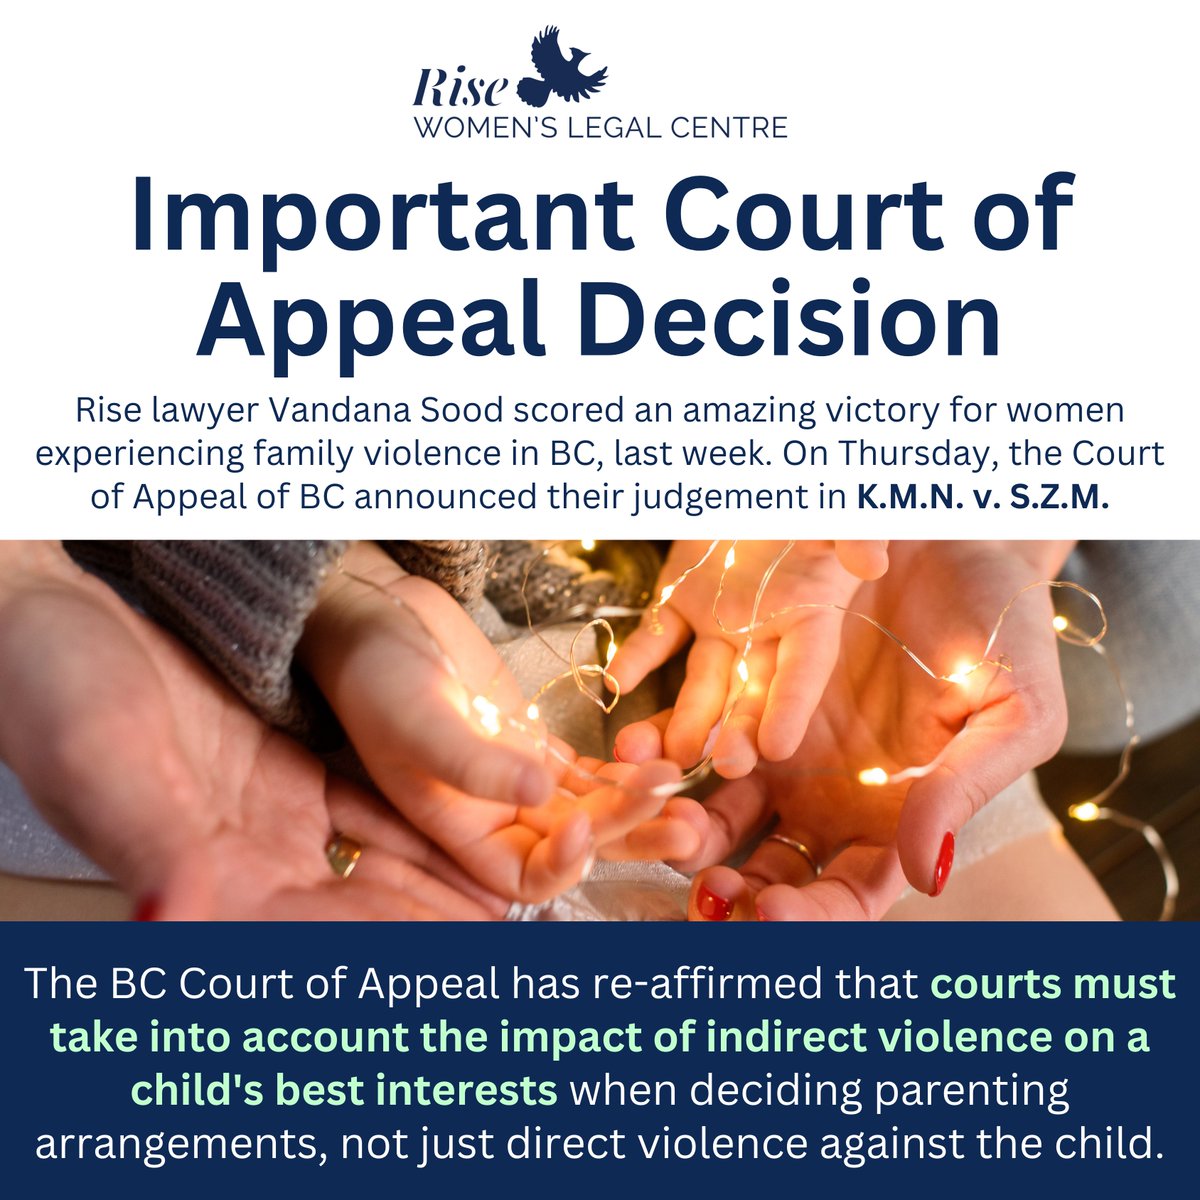 Important Court of Appeal Decision! Rise lawyer Vandana Sood scored an amazing victory for women experiencing family violence in BC, last week. On Thursday, the Court of Appeal of BC announced their judgement in K.M.N. v. S.Z.M. womenslegalcentre.ca/court-of-appea…